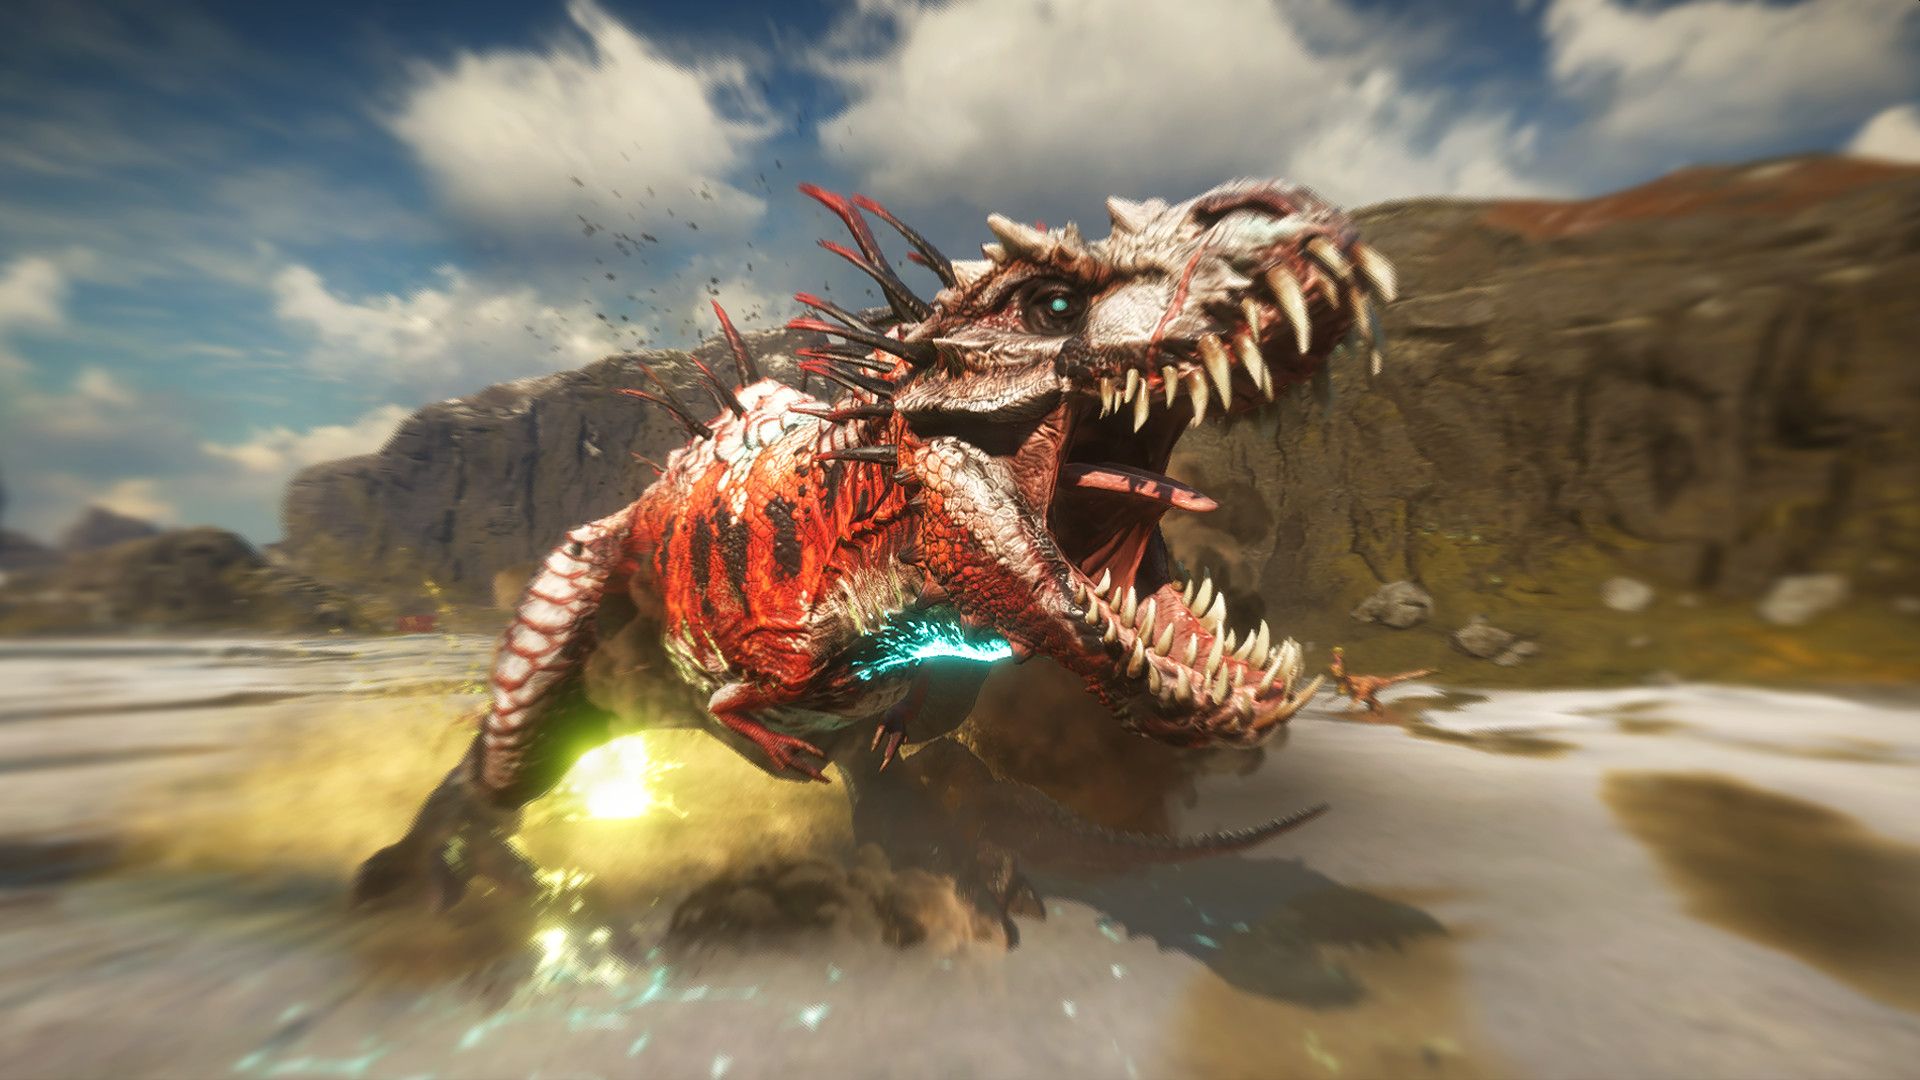 In today's free game from Epic, you must kill all the dinosaurs again